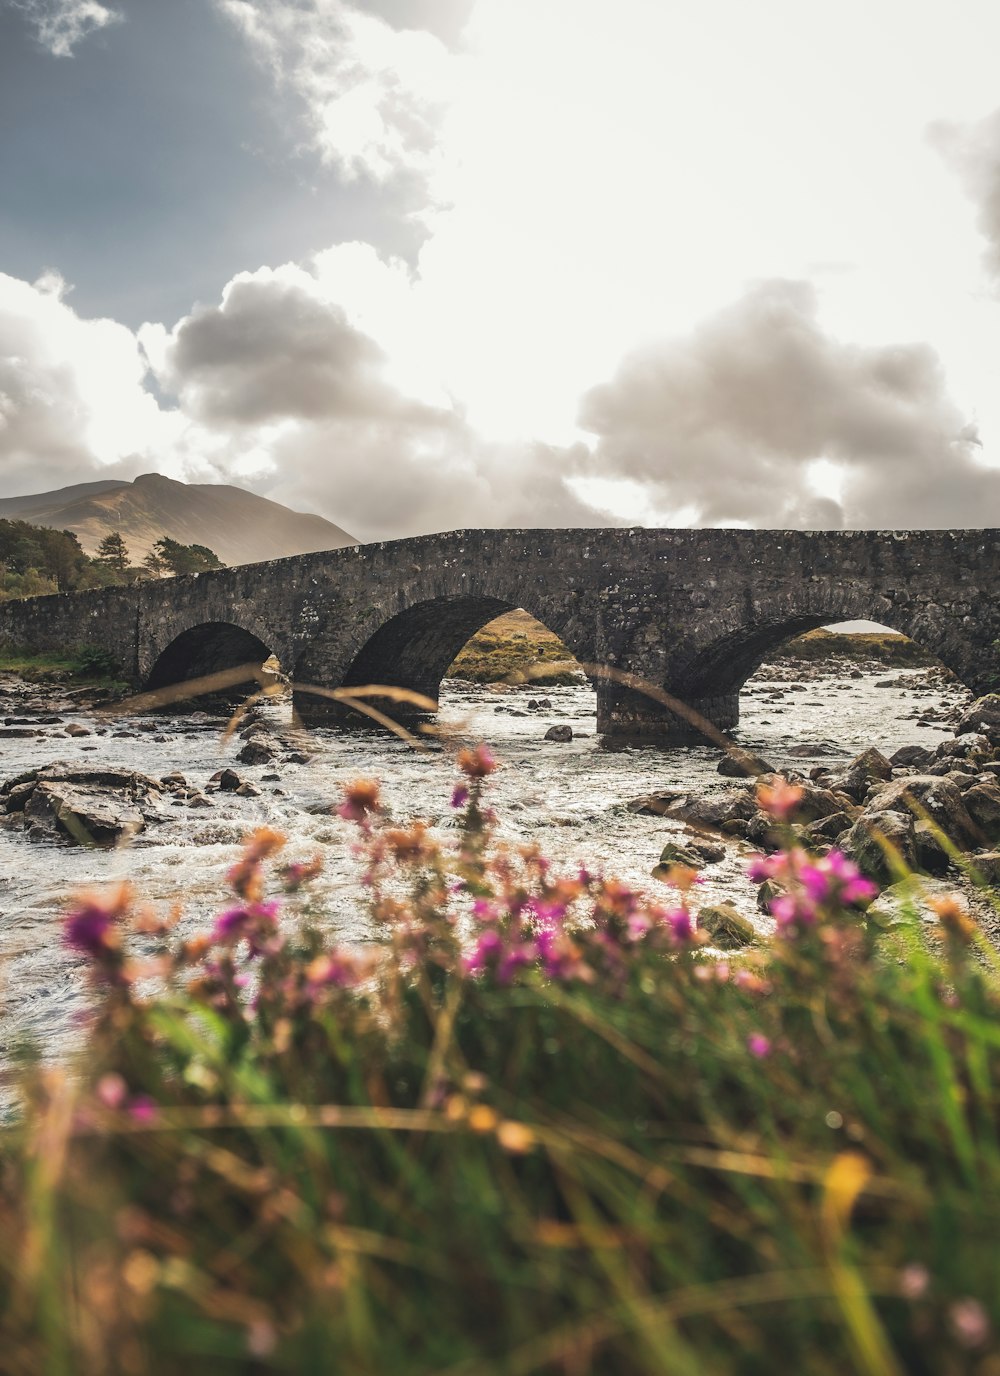 a stone bridge over a river with wildflowers in the foreground